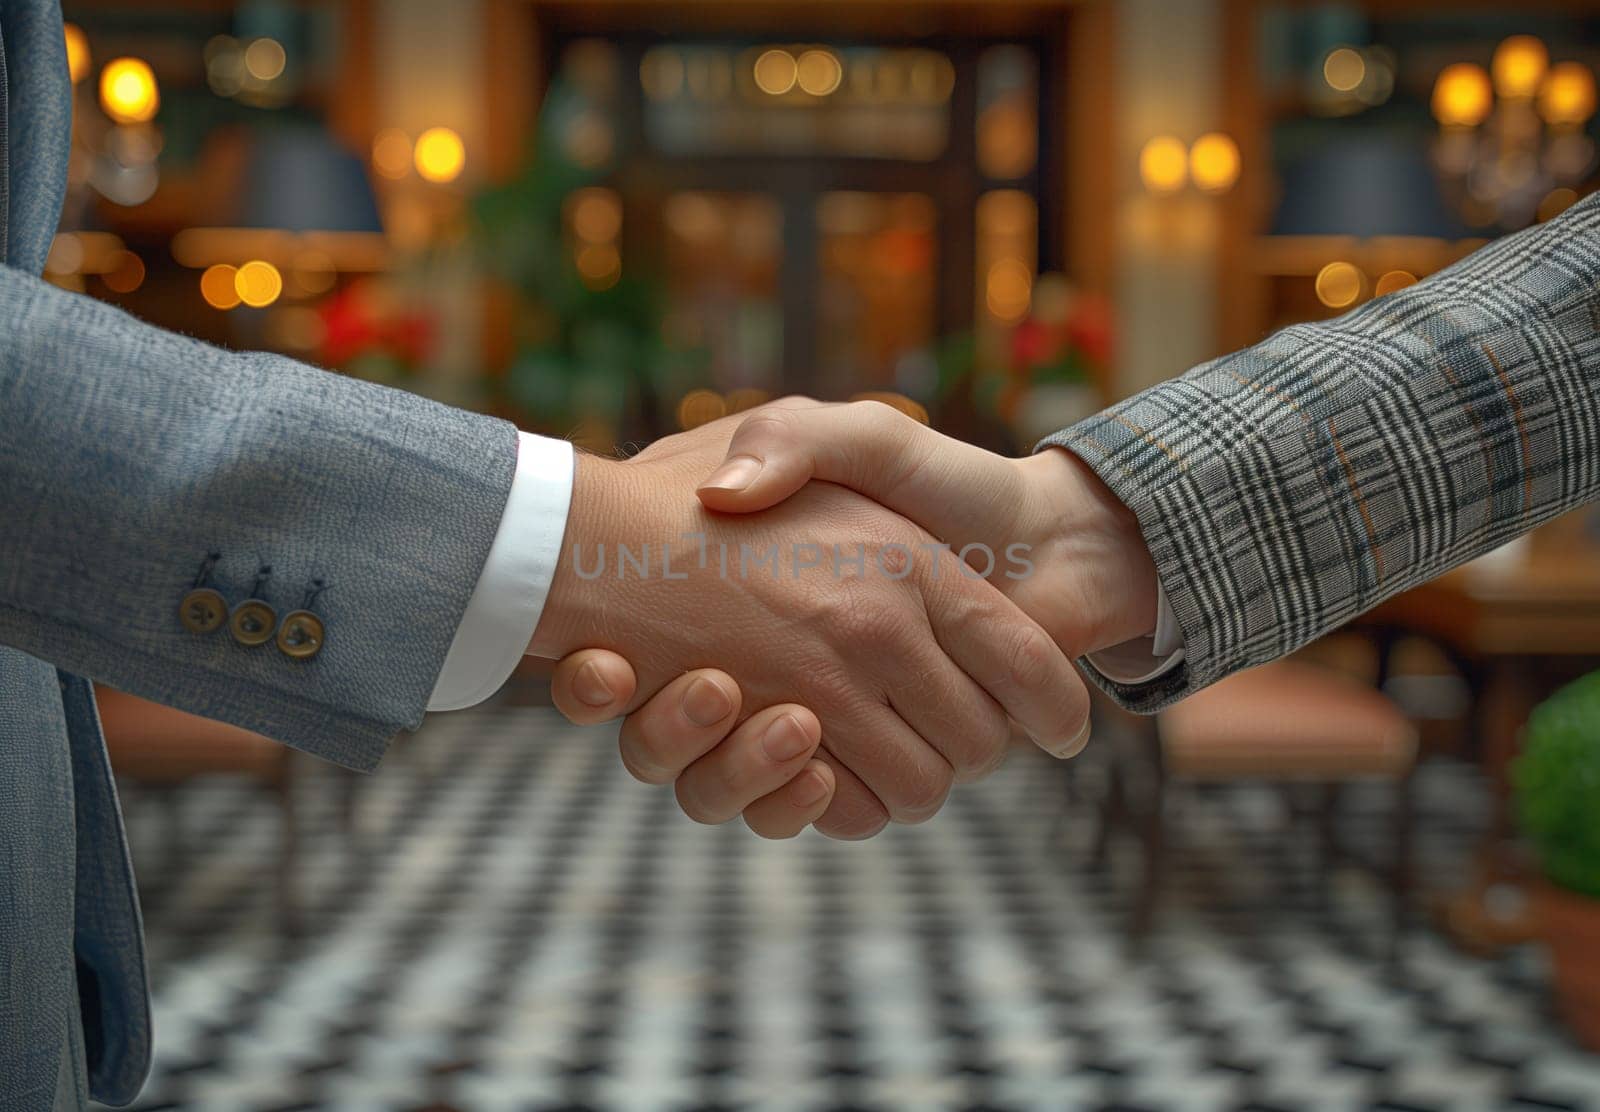 A close up of two men holding hands in a restaurant, their fingers interlocked in a firm and friendly gesture. One mans sleeve is a vibrant electric blue, contrasting with the others neutral tone